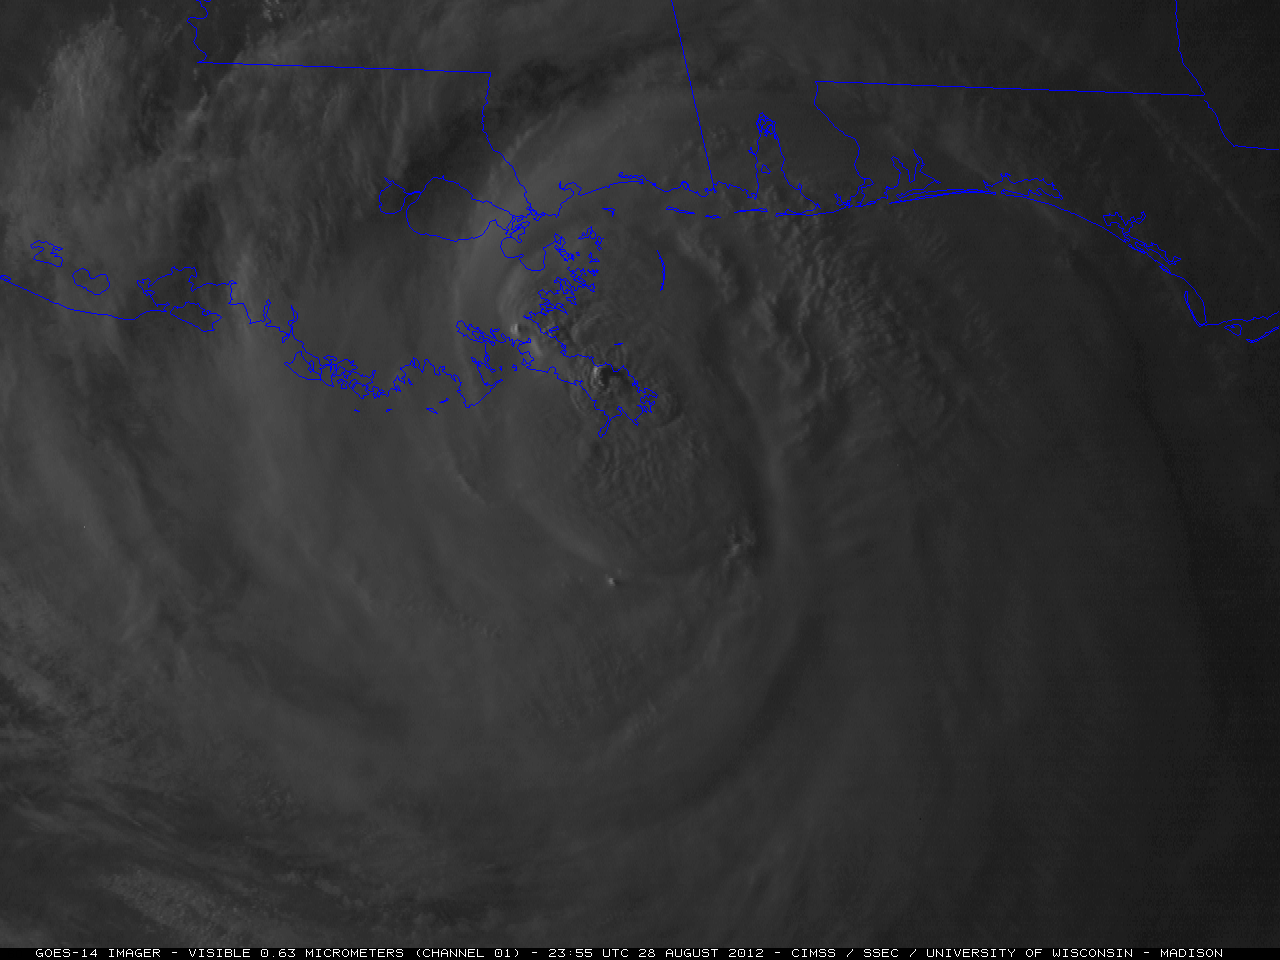 GOES-14 0.63 Âµm visible images (click image to play animation)